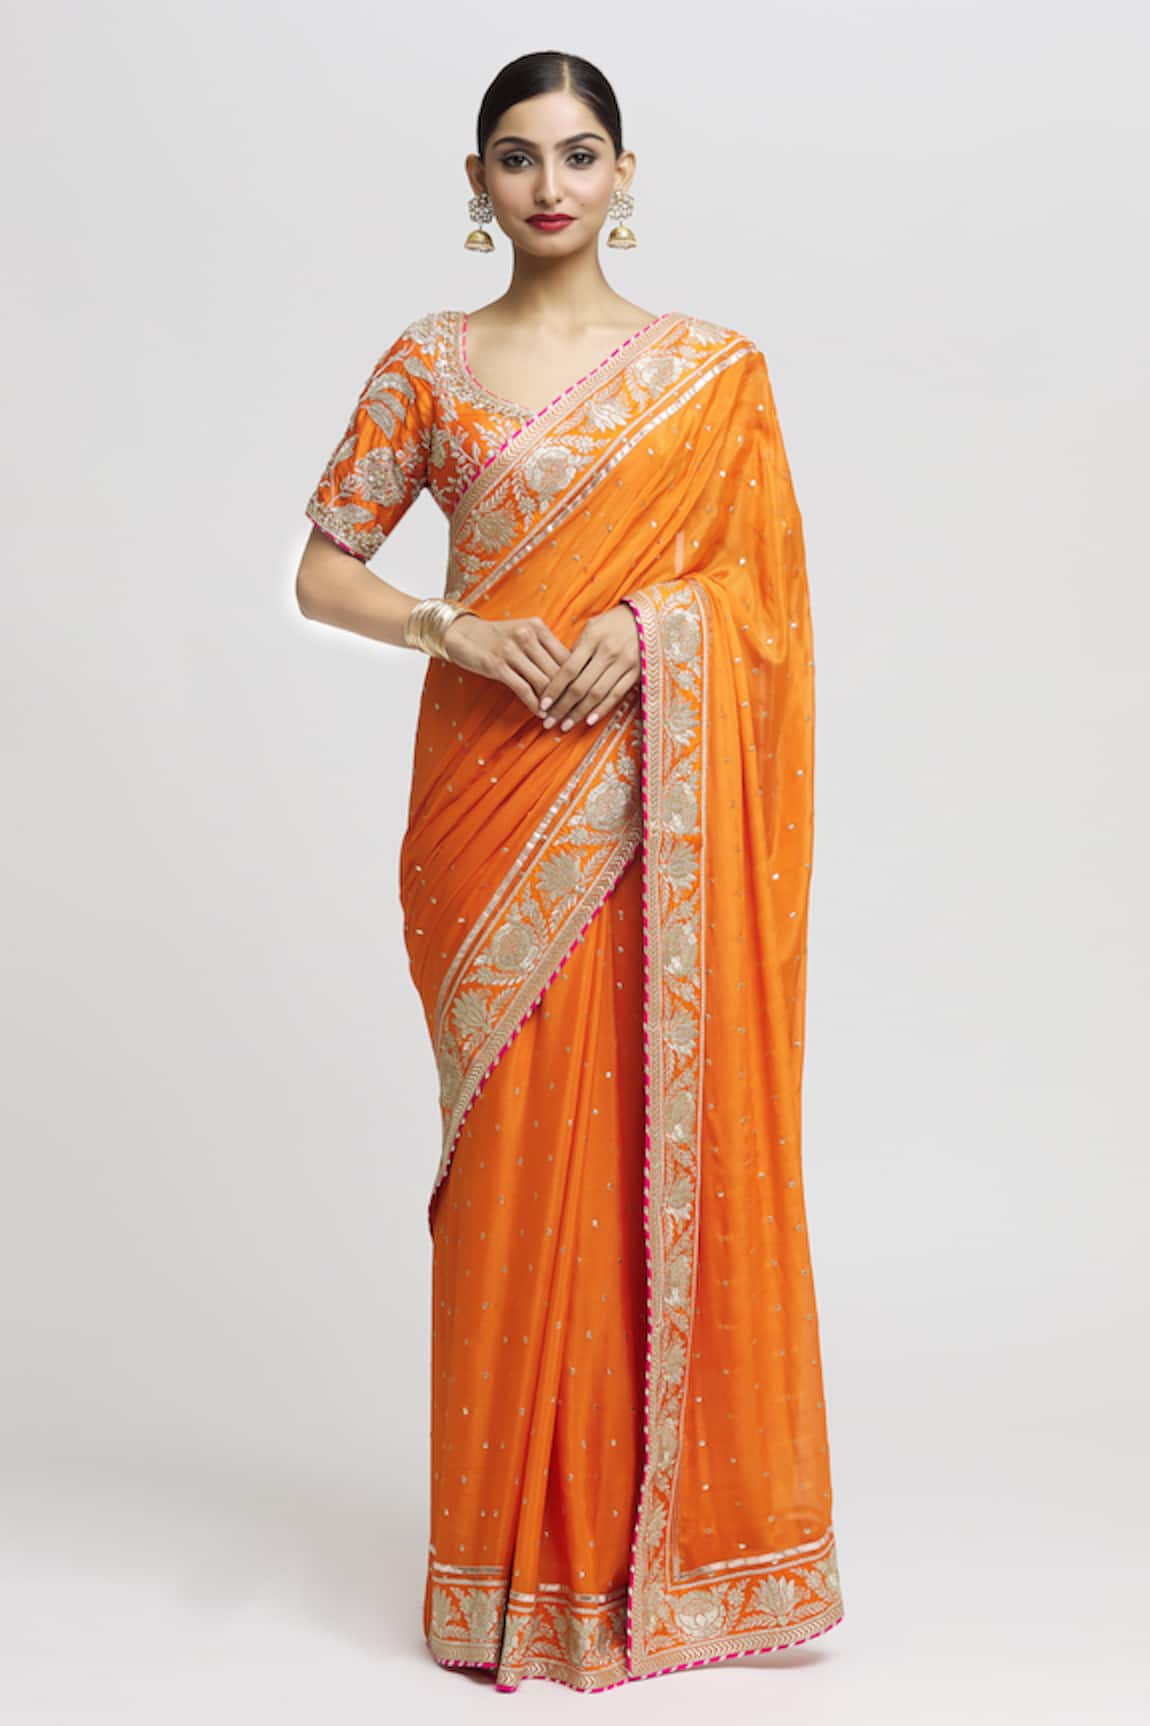 Gopi Vaid Fez Border Embroidered Saree With Blouse